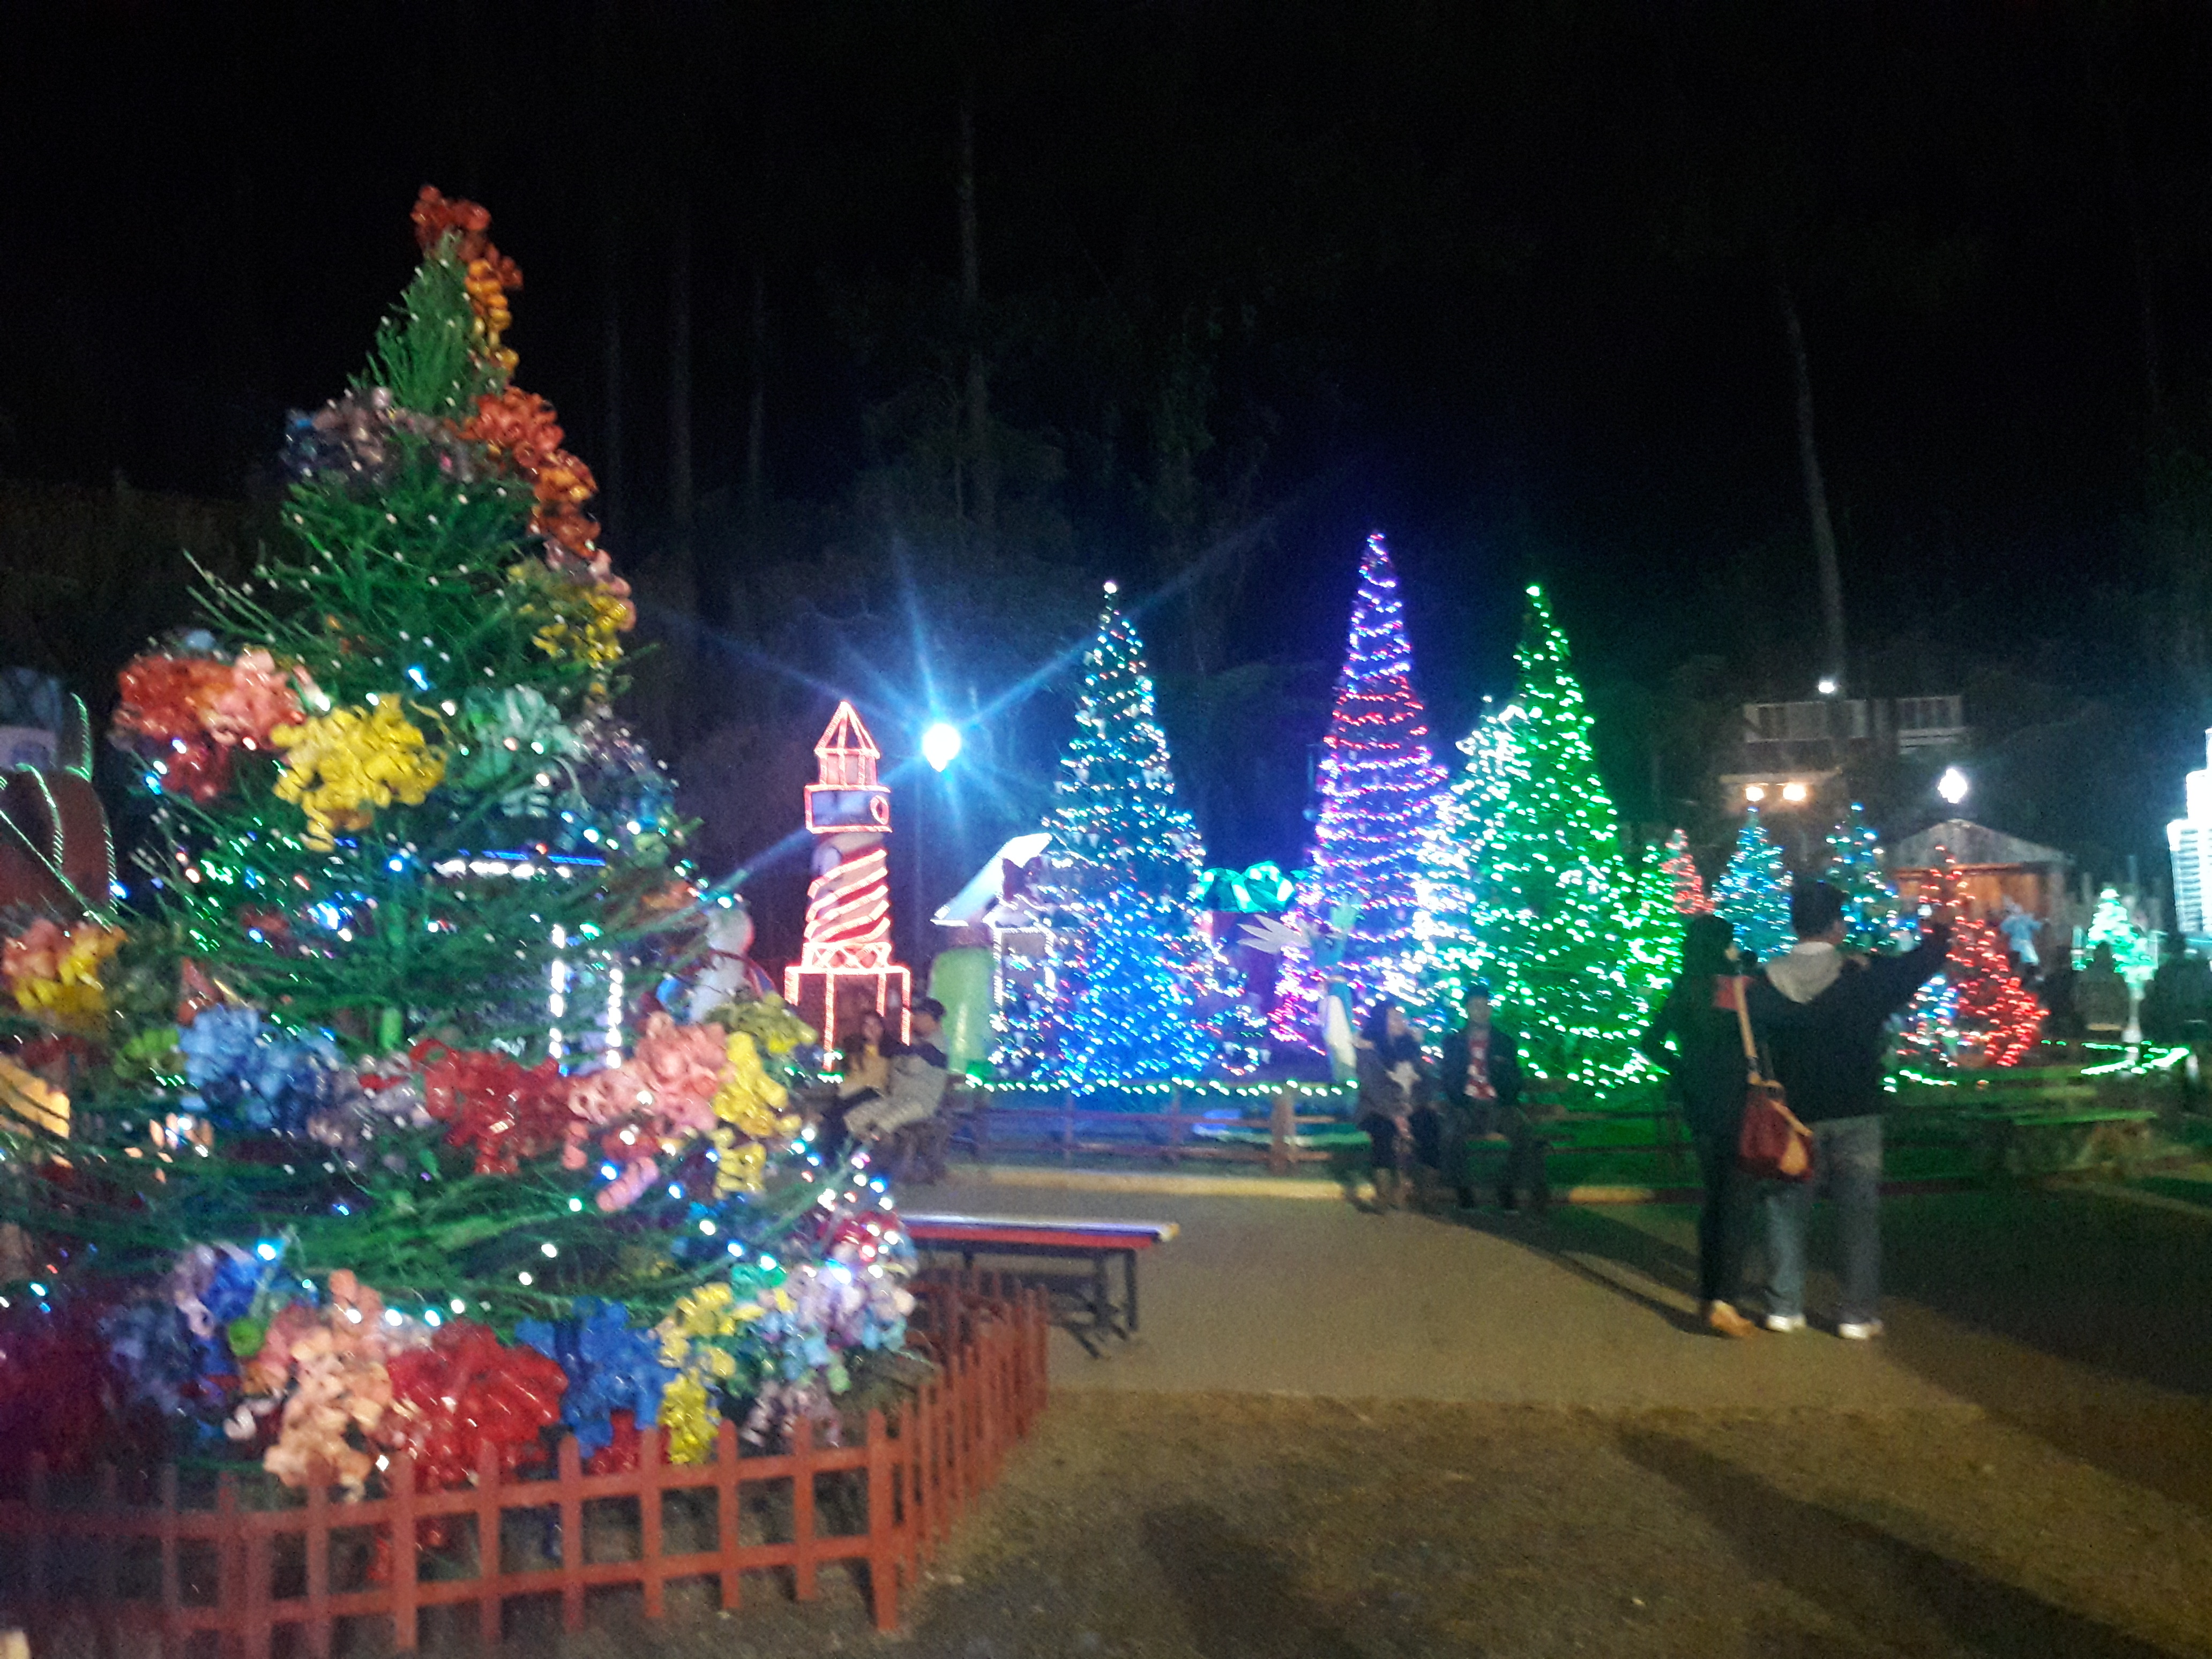 baguio country club christmas village 2019  christmas village baguio 2019  christmas village baguio 2019 schedule  christmas village baguio 2019 opening  christmas village baguio 2018 opening  christmas village baguio 2018 schedule  christmas village baguio entrance fee 2019  christmas village baguio blog  Page navigation